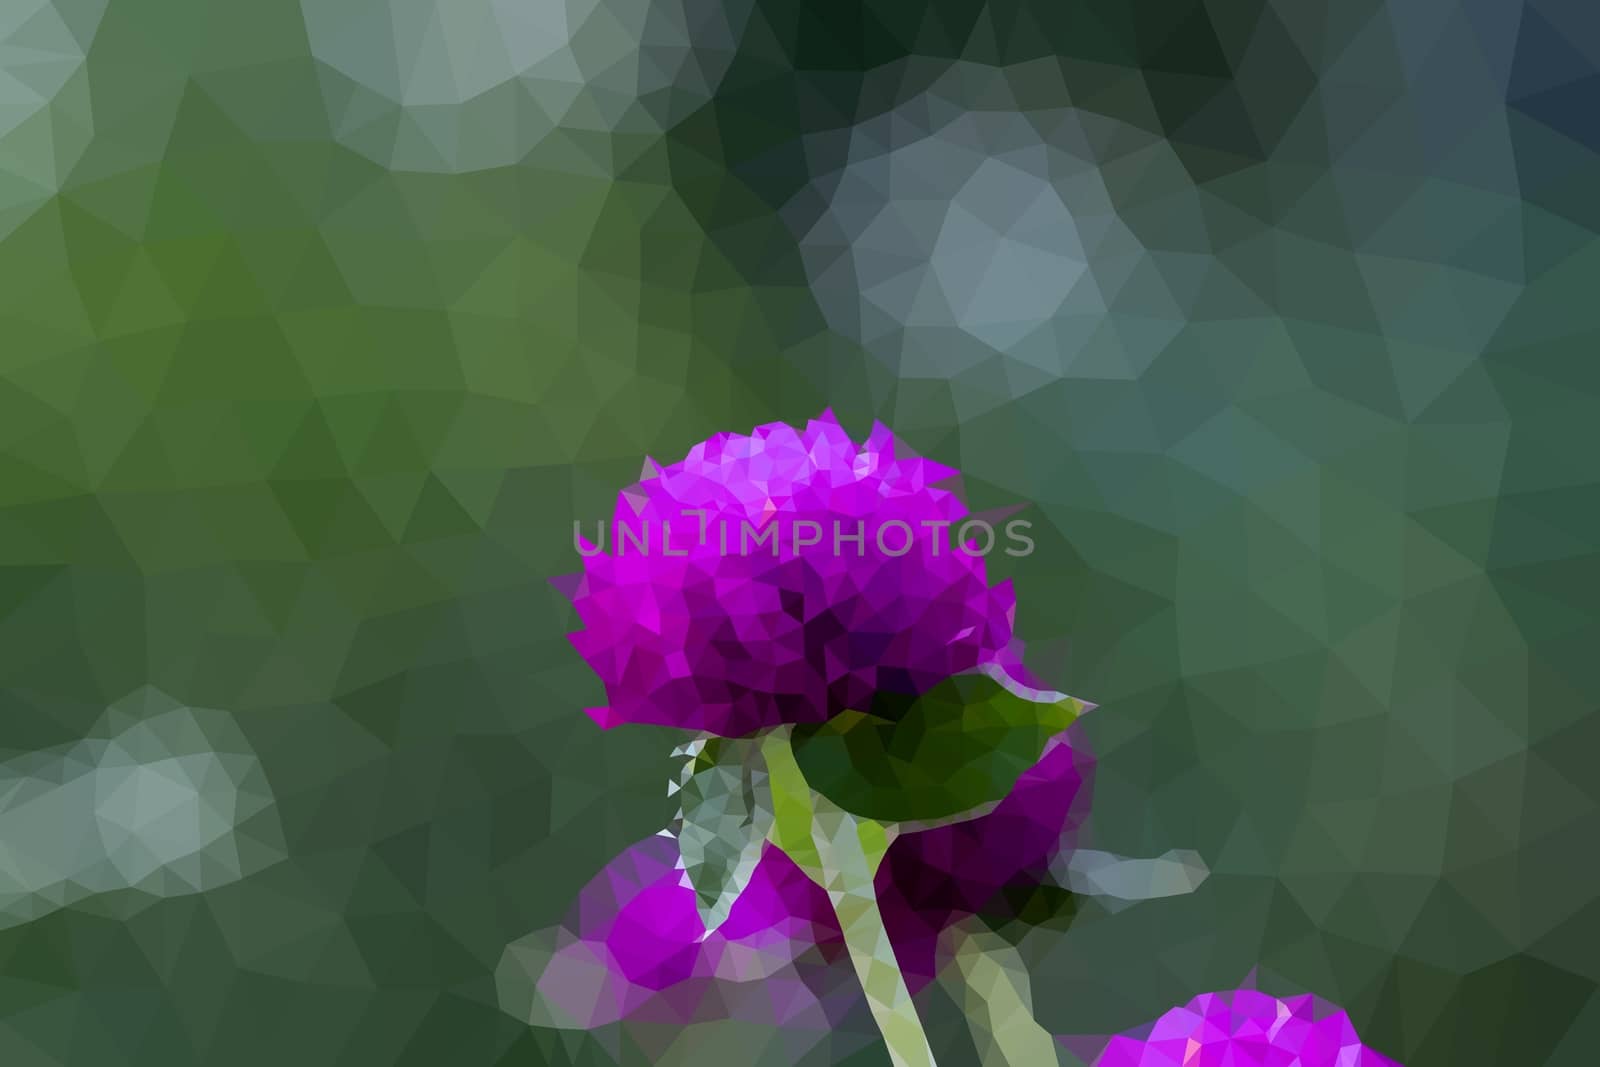 Abstract Triangles flowers of Purple Grobe Amaranth or Bachelor's Button by peerapixs